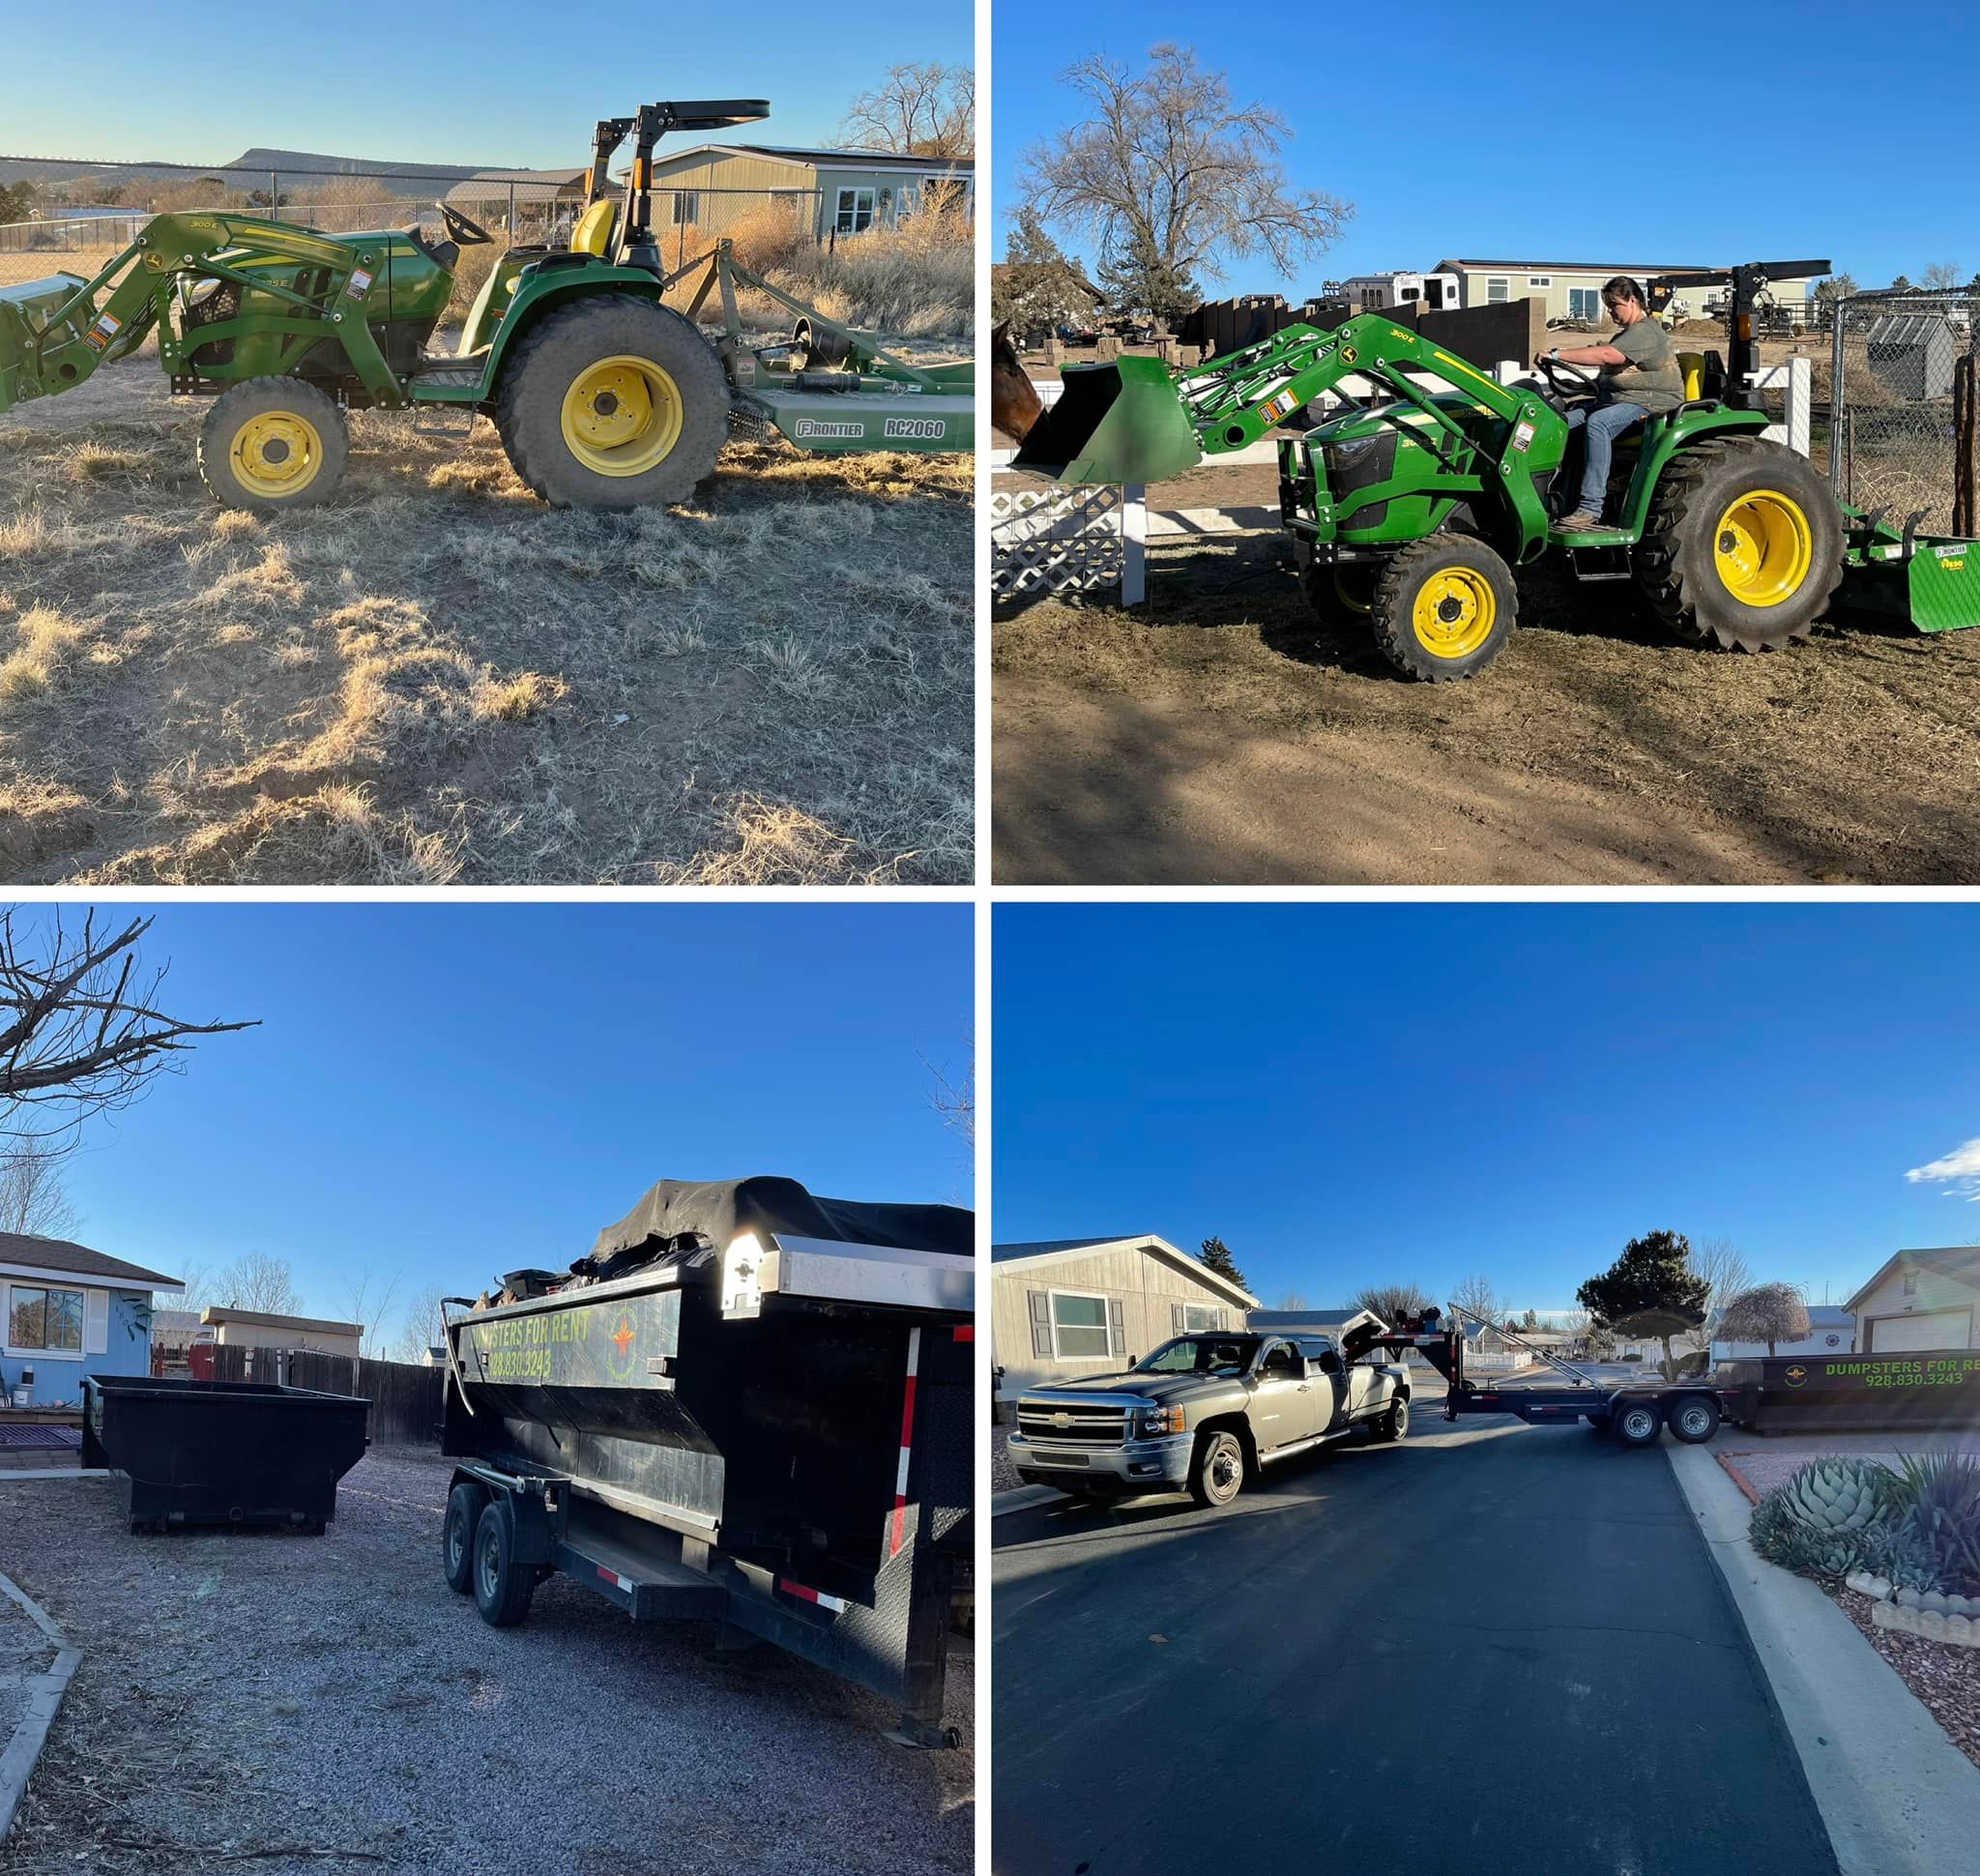 Junk Removal for Northern Arizona Hauling and Removal LLC in Prescott, AZ